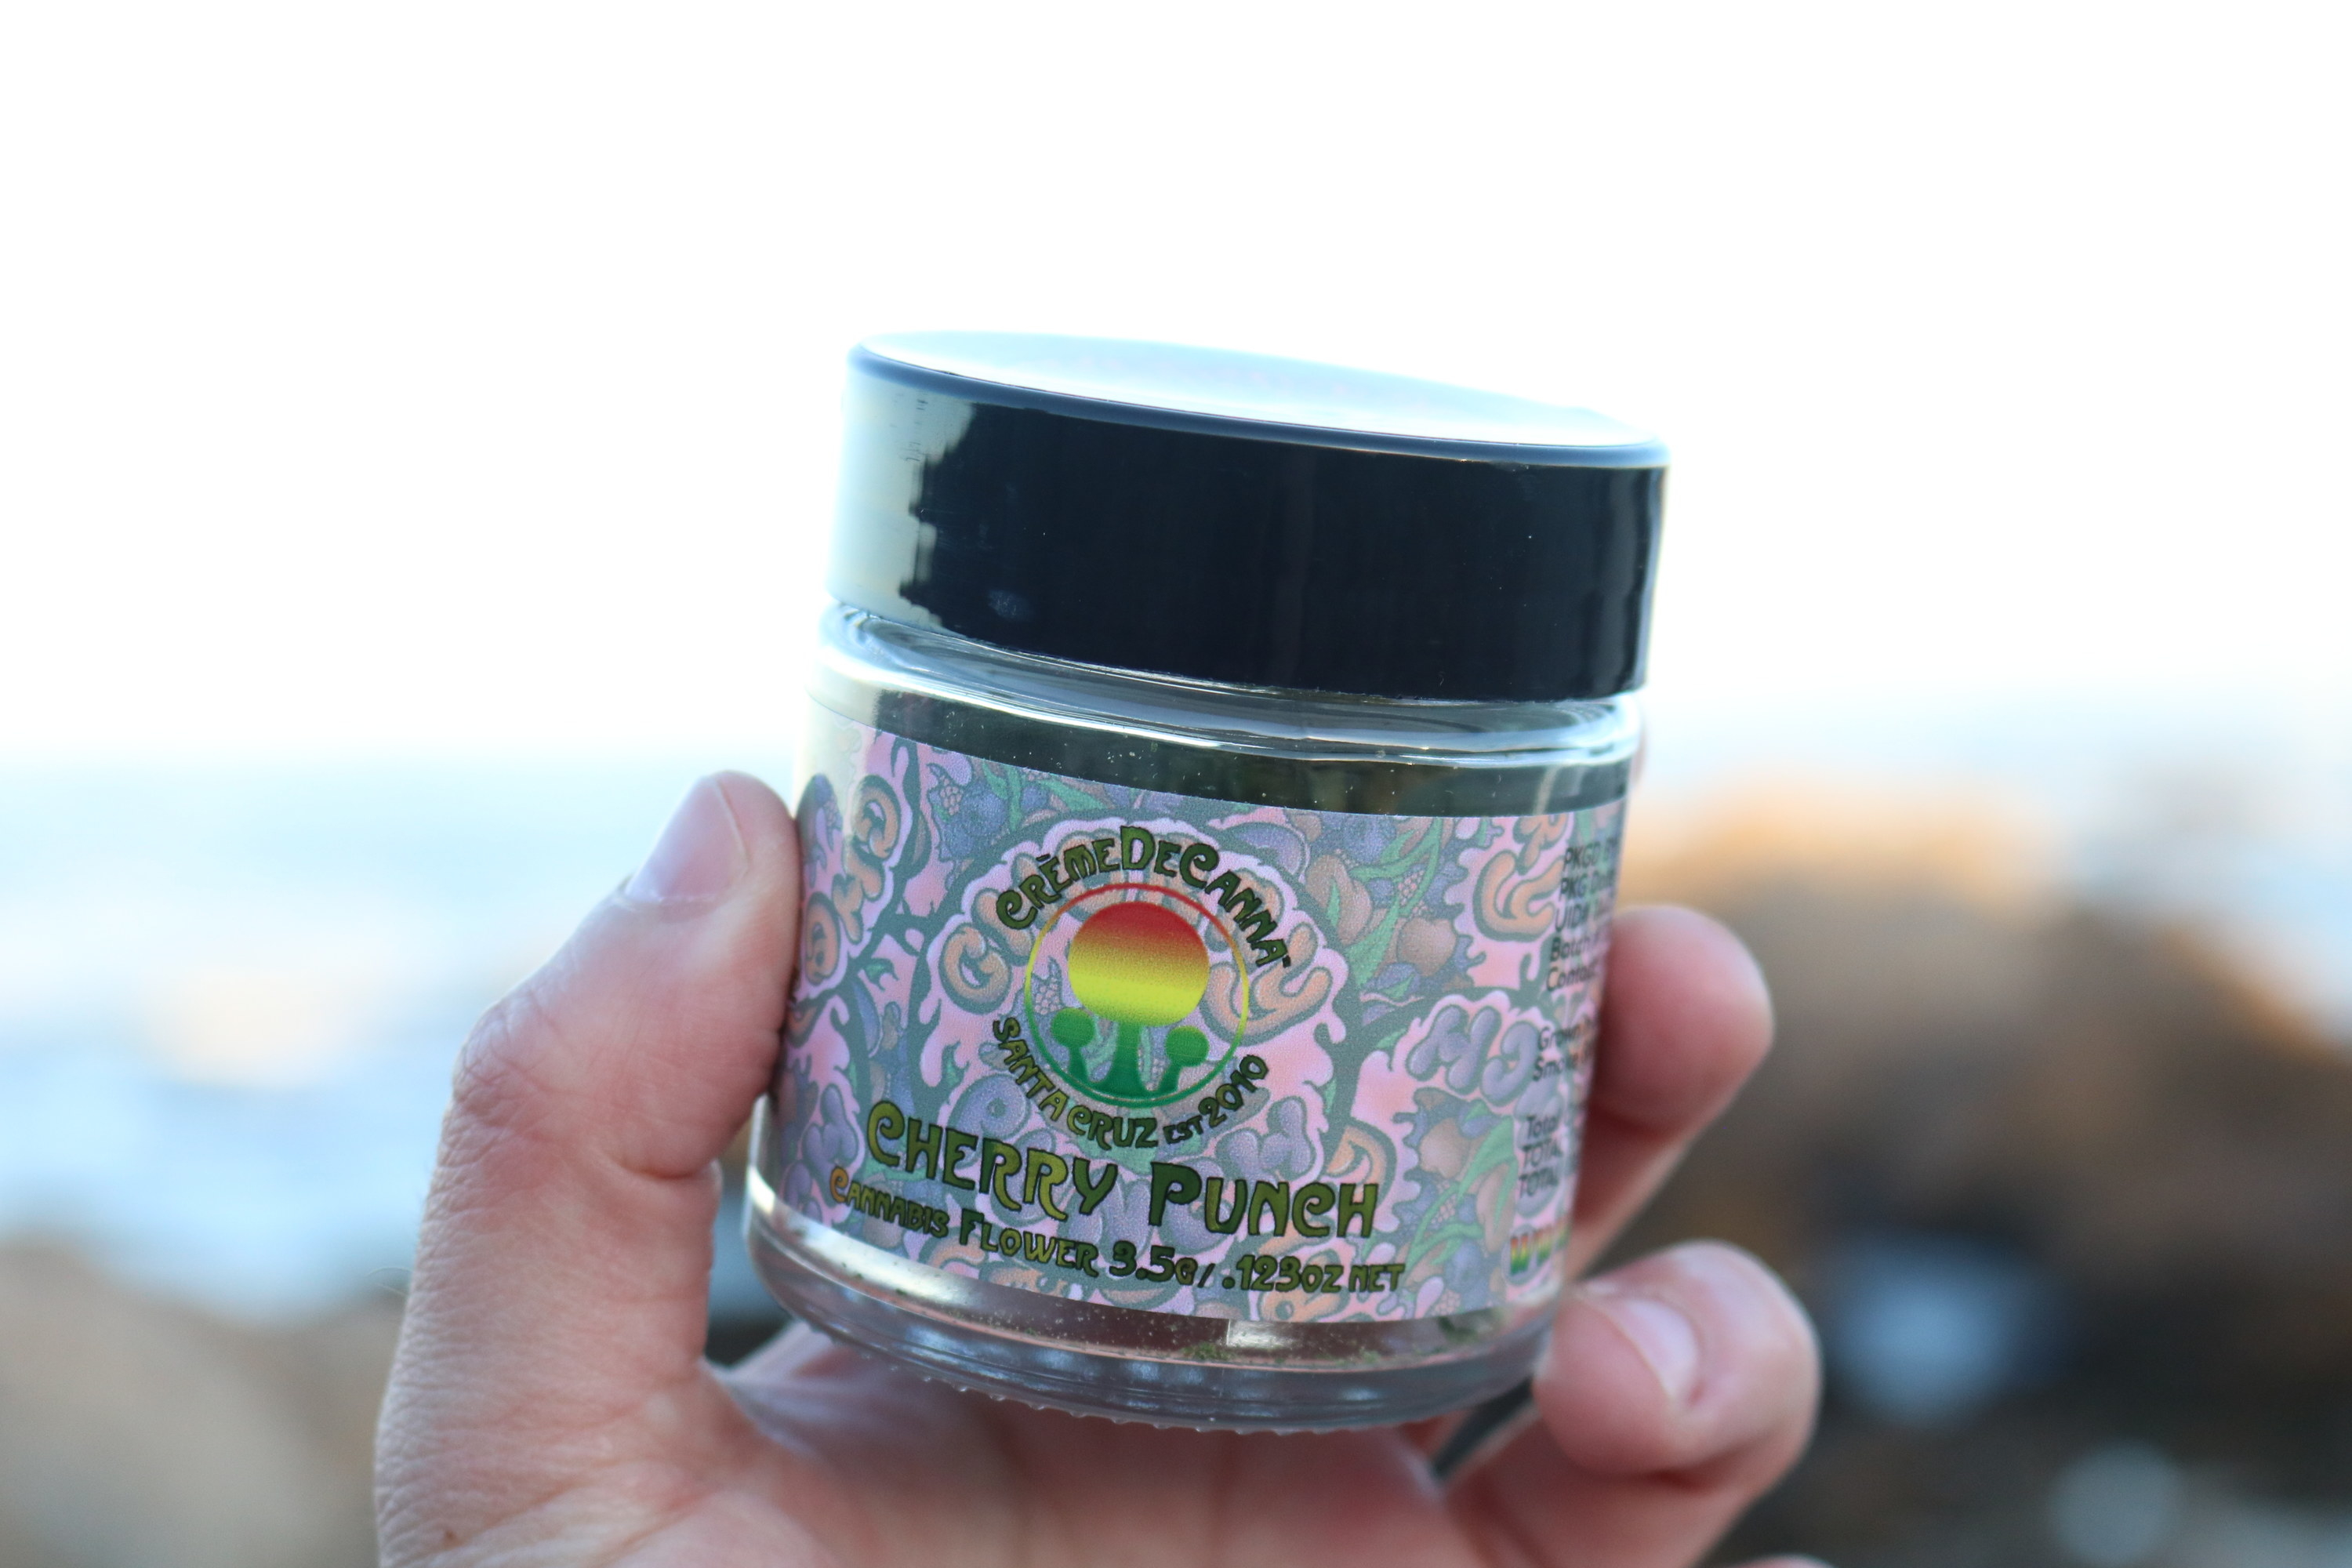 The creme de canna cannabis packaging for cherry punch